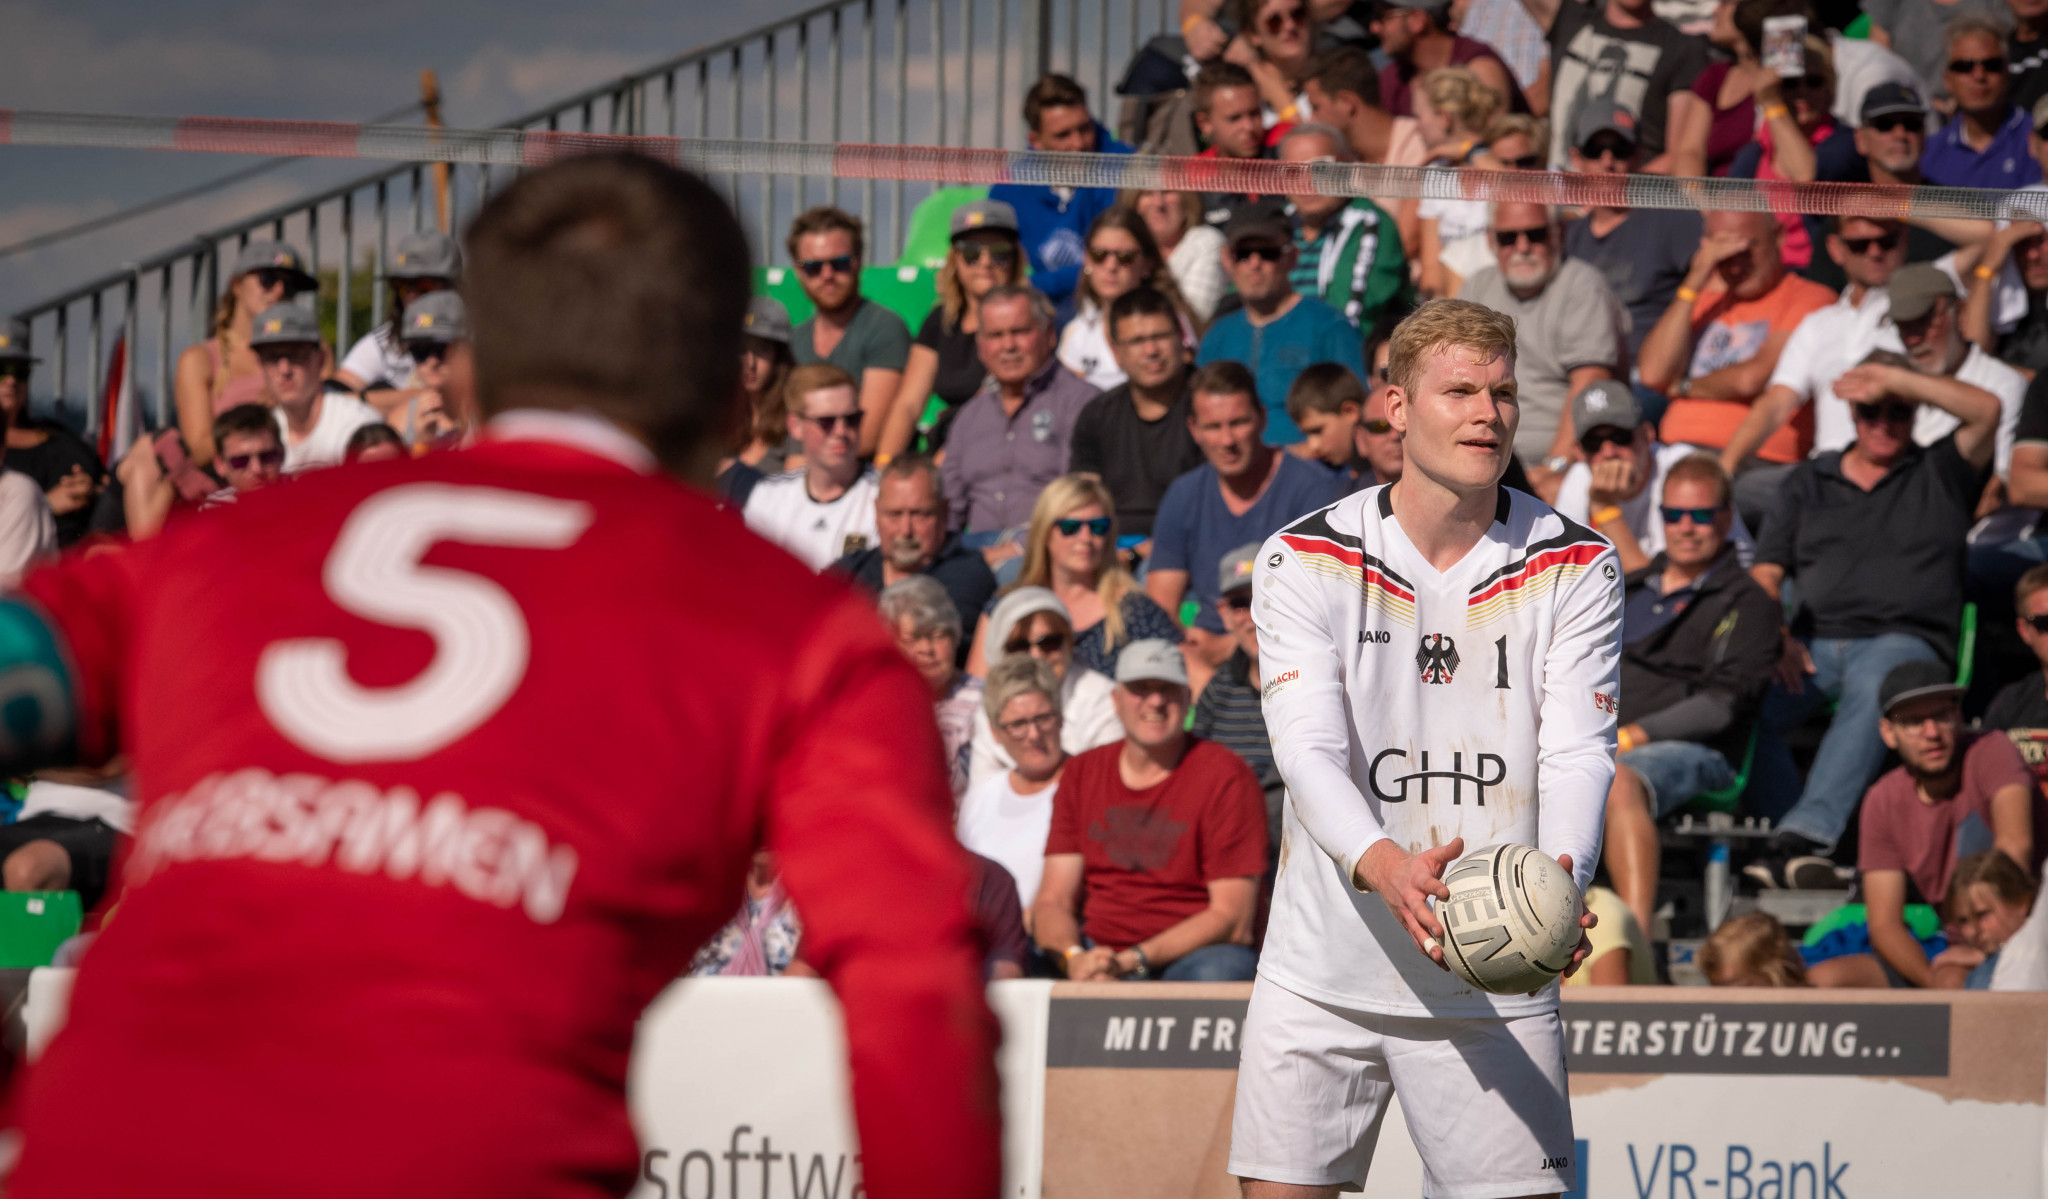 Patrick Thomas, right, will be part of the German team which is bidding to defend its 2015 world title and win an 11th win in 14 editions at the IFA World Fistball Championship in Winterthur  ©IFA